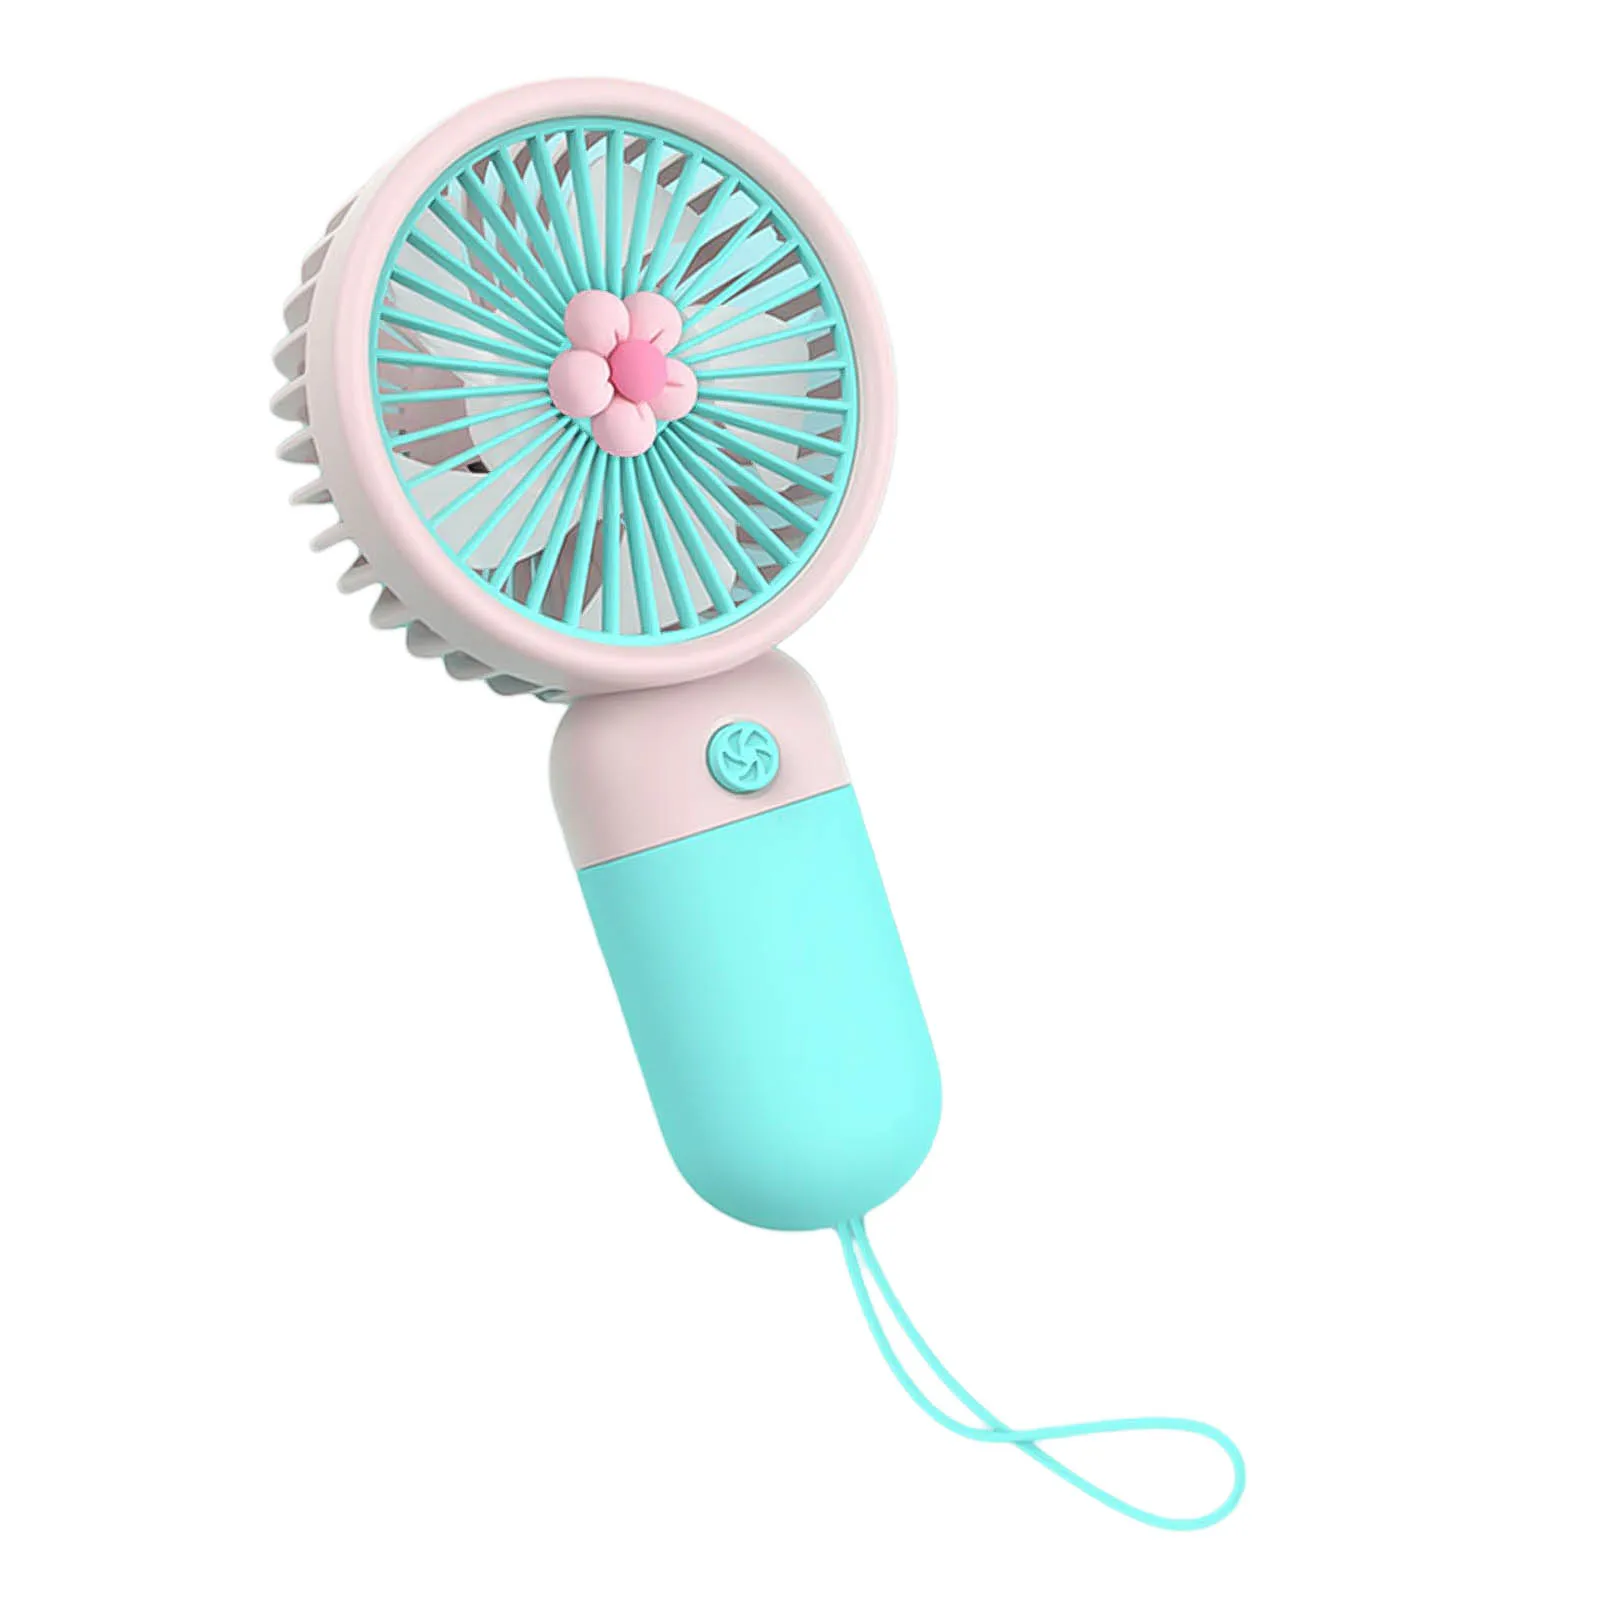 

Compact Handheld Fan with Elastic Lanyard Portable and Easy to Carry for Refreshing Breezes Anytime and Anywhere